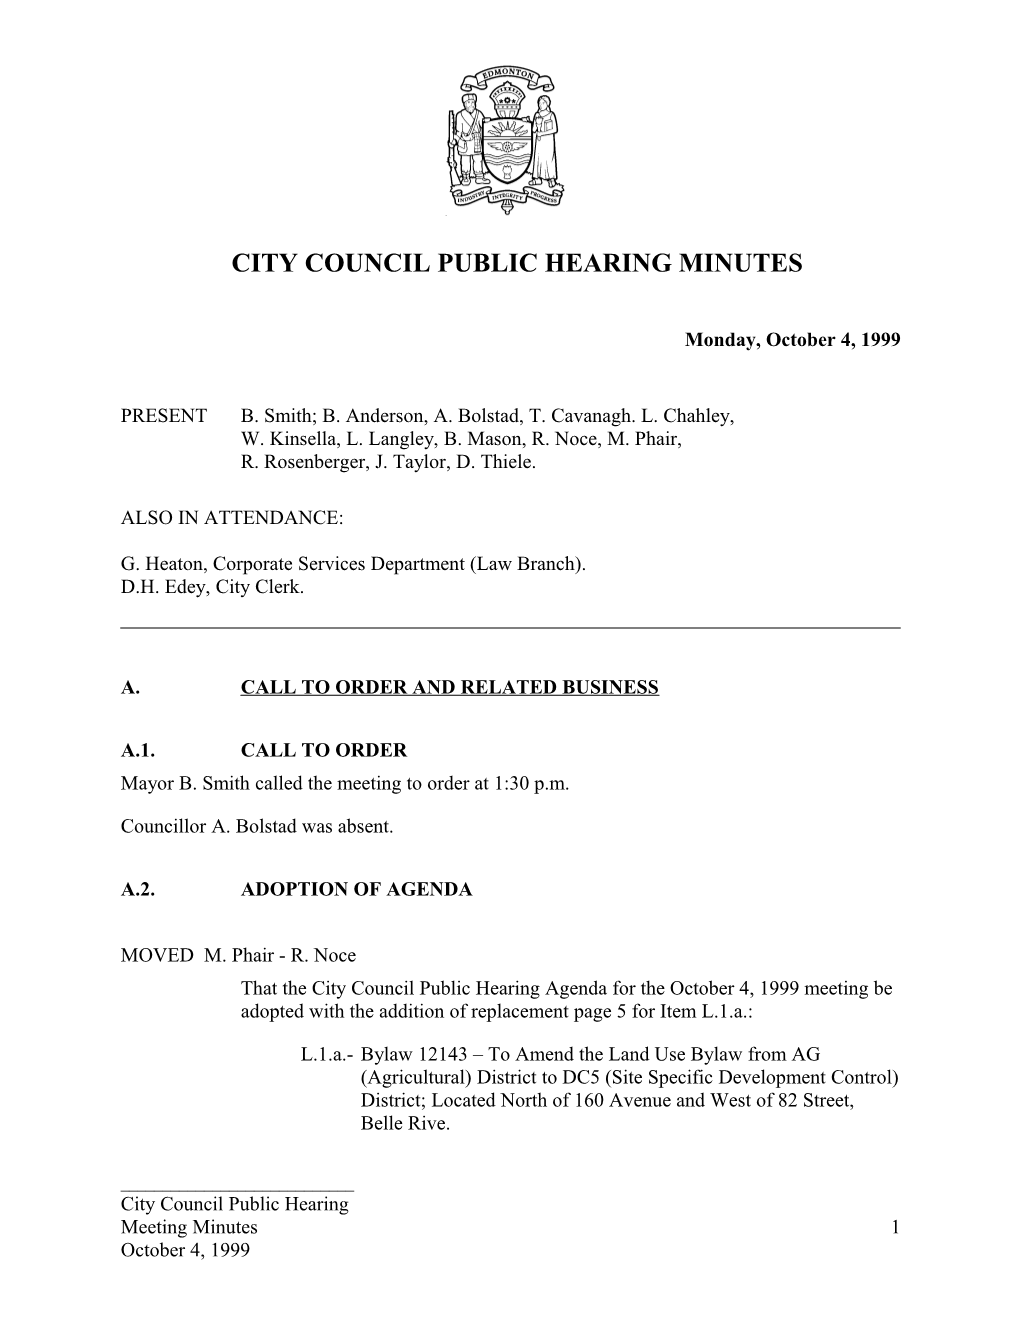 Minutes for City Council October 4, 1999 Meeting